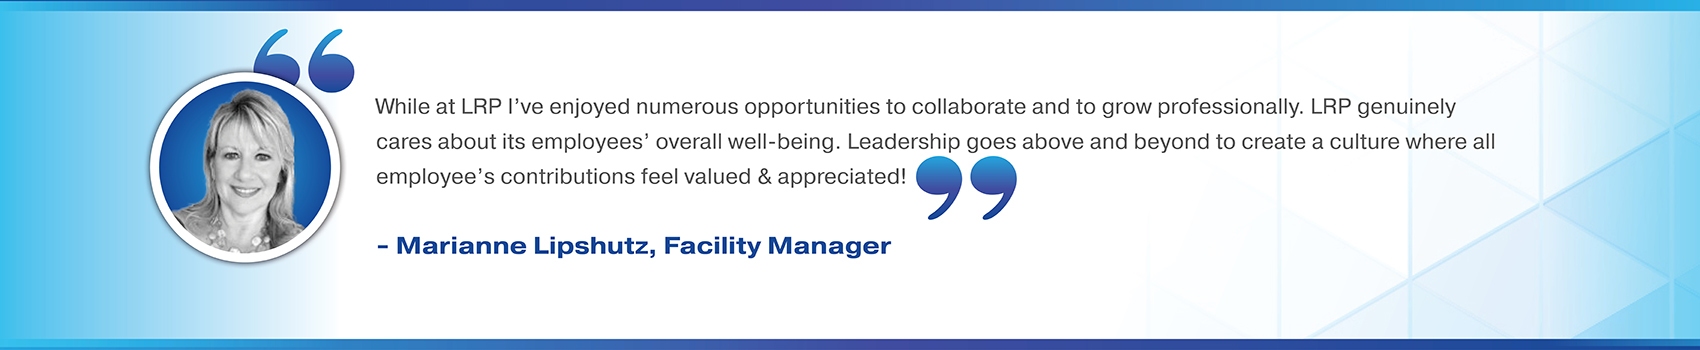 While at LRP I’ve enjoyed numerous opportunities to collaborate and to grow professionally. LRP genuinely cares about its employees’ overall well-being. Leadership goes above and beyond to create a culture where all employee’s contributions feel valued & appreciated! Marianne Lipshutz, Facility Manager 